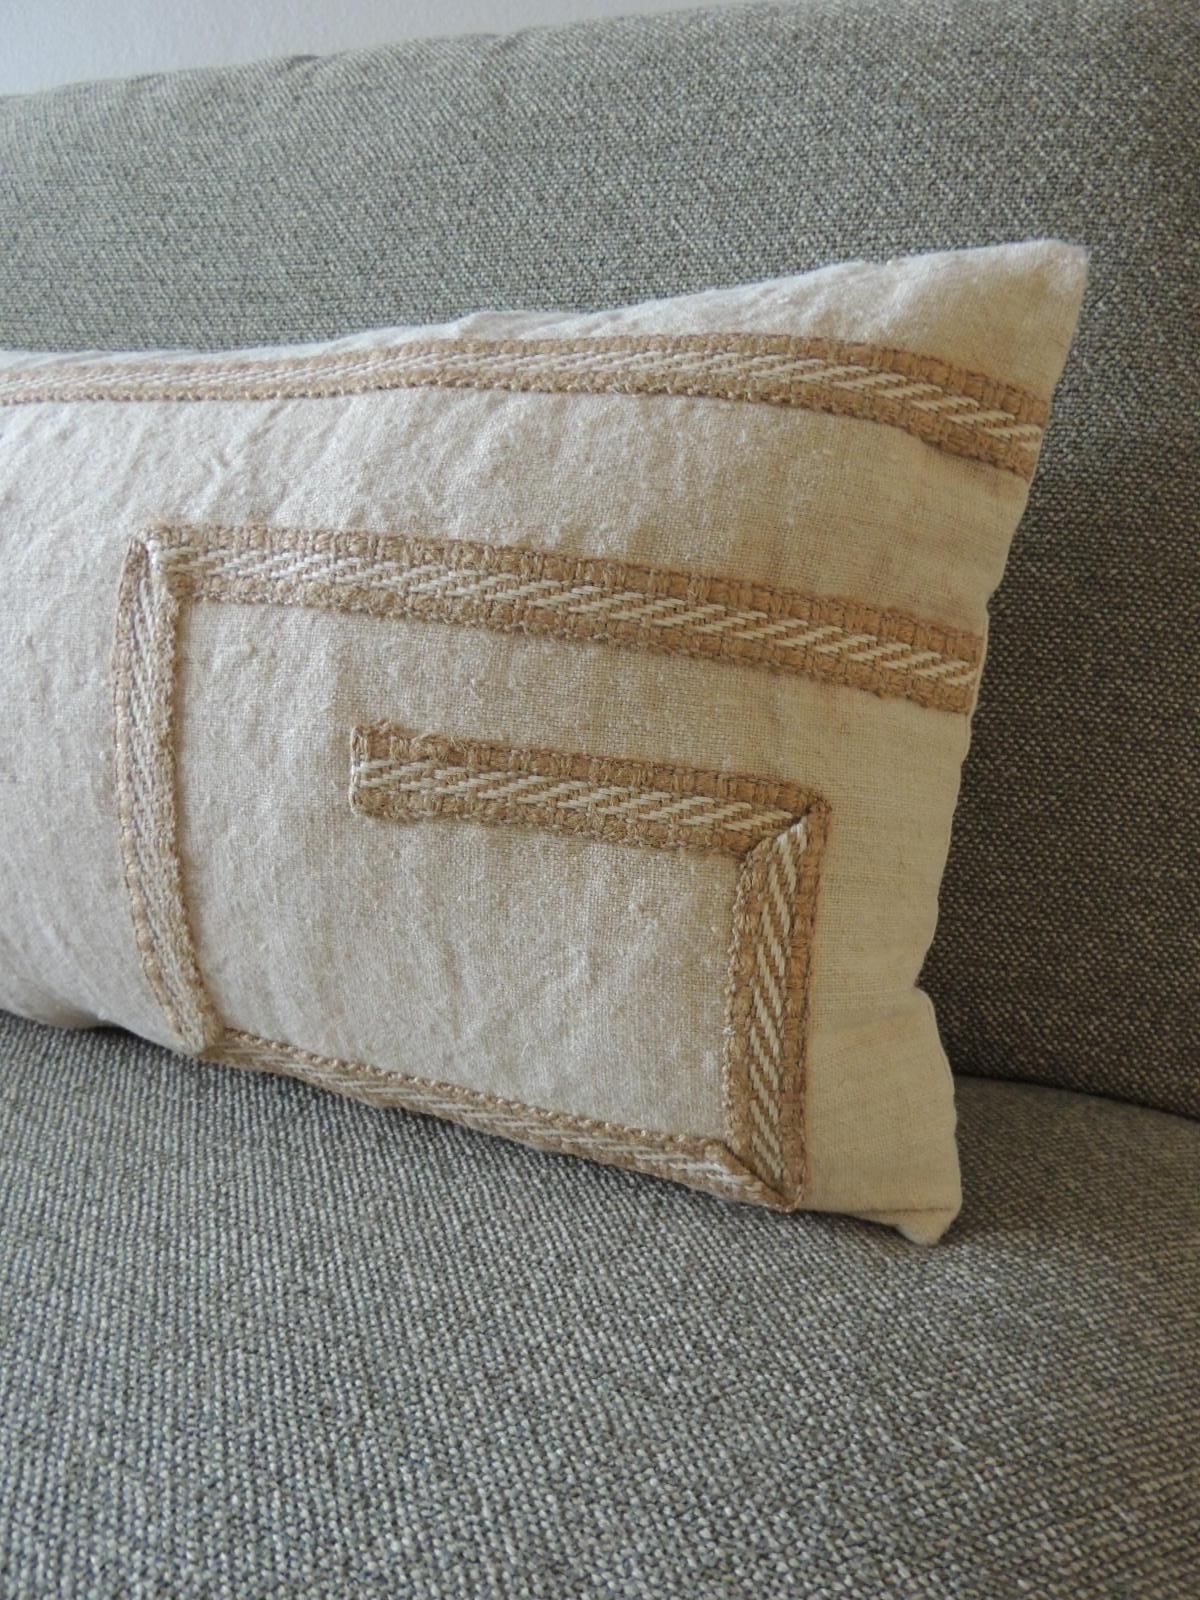 Antique linen decorative bolster pillow with vintage jute trim.
Greek key pattern,
Natural cotton backing.
Decorative pillow handcrafted and designed in the USA.
Closure by stitch (no zipper closure) with custom made pillow insert.
Size: 13